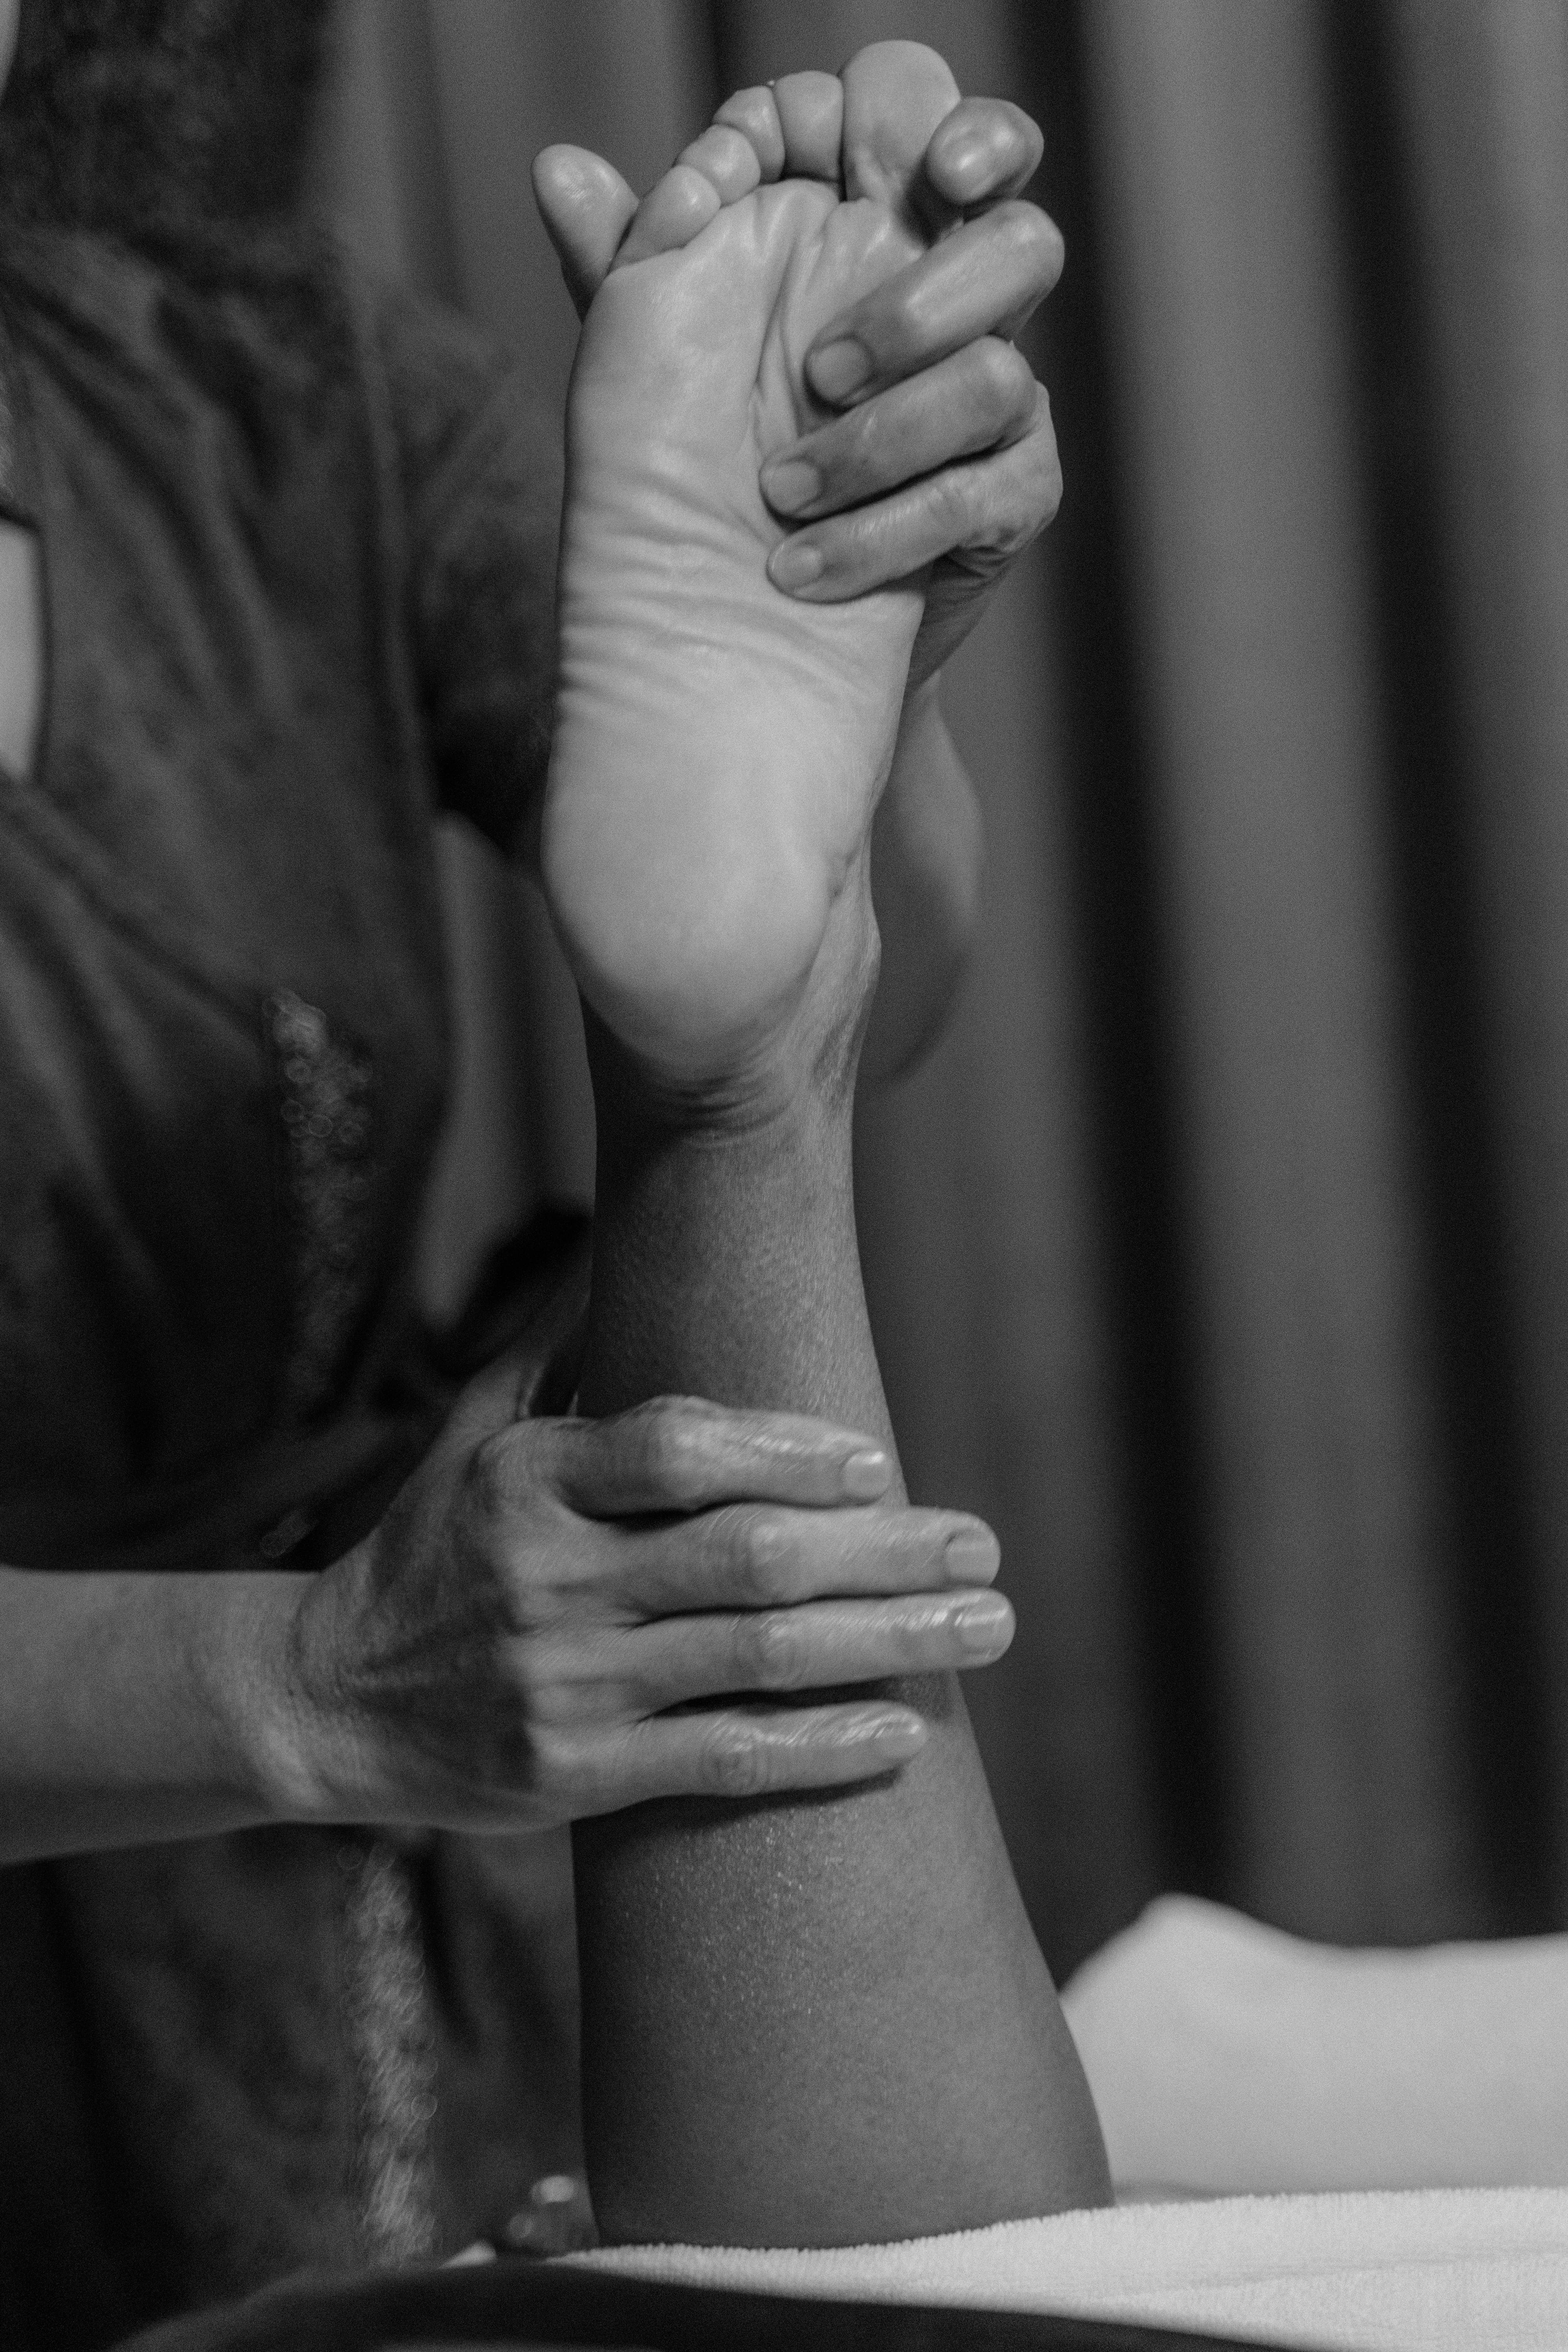 grayscale photo of a person doing a massage on a foot